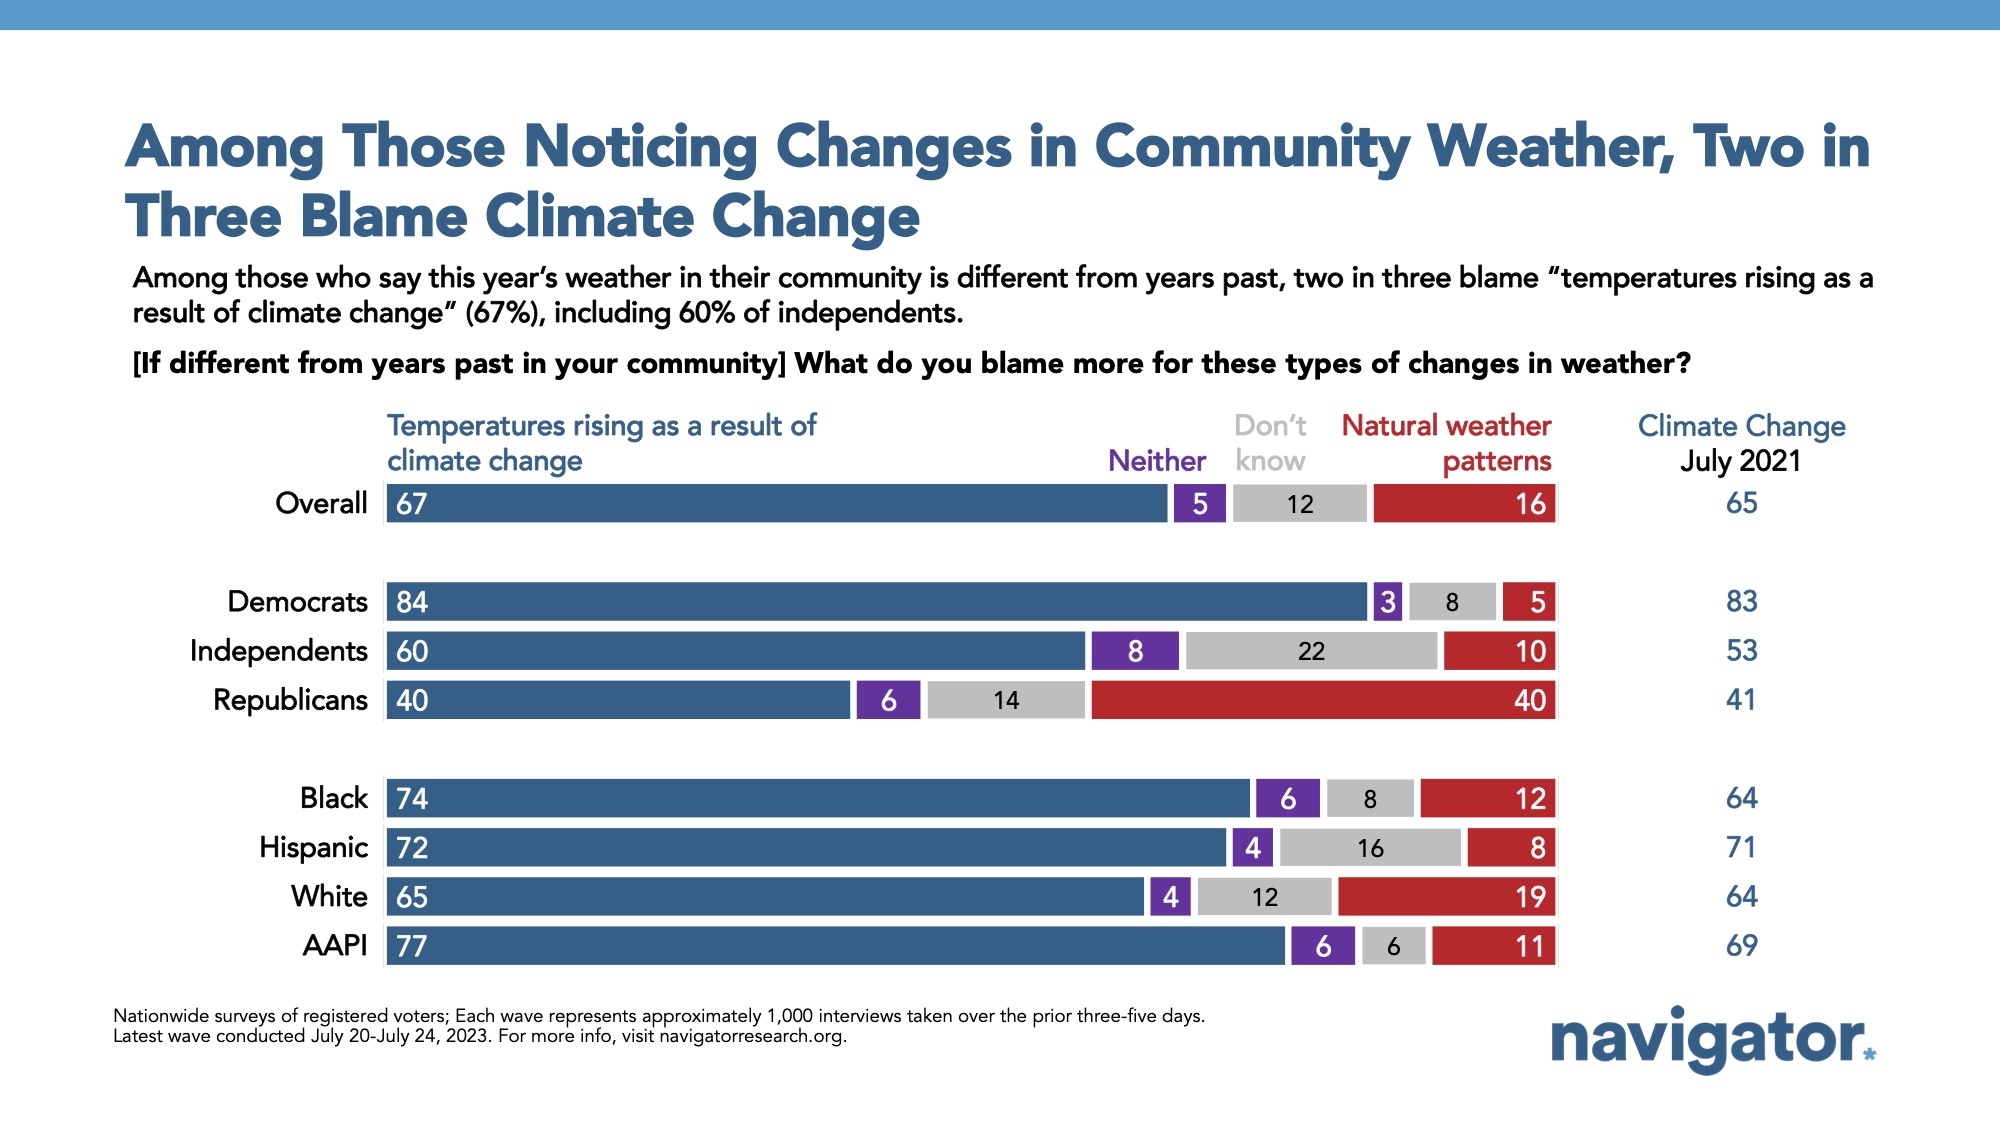 Survey results to the following prompt: [If different from years past in your community] What do you blame more for these types of changes in weather?